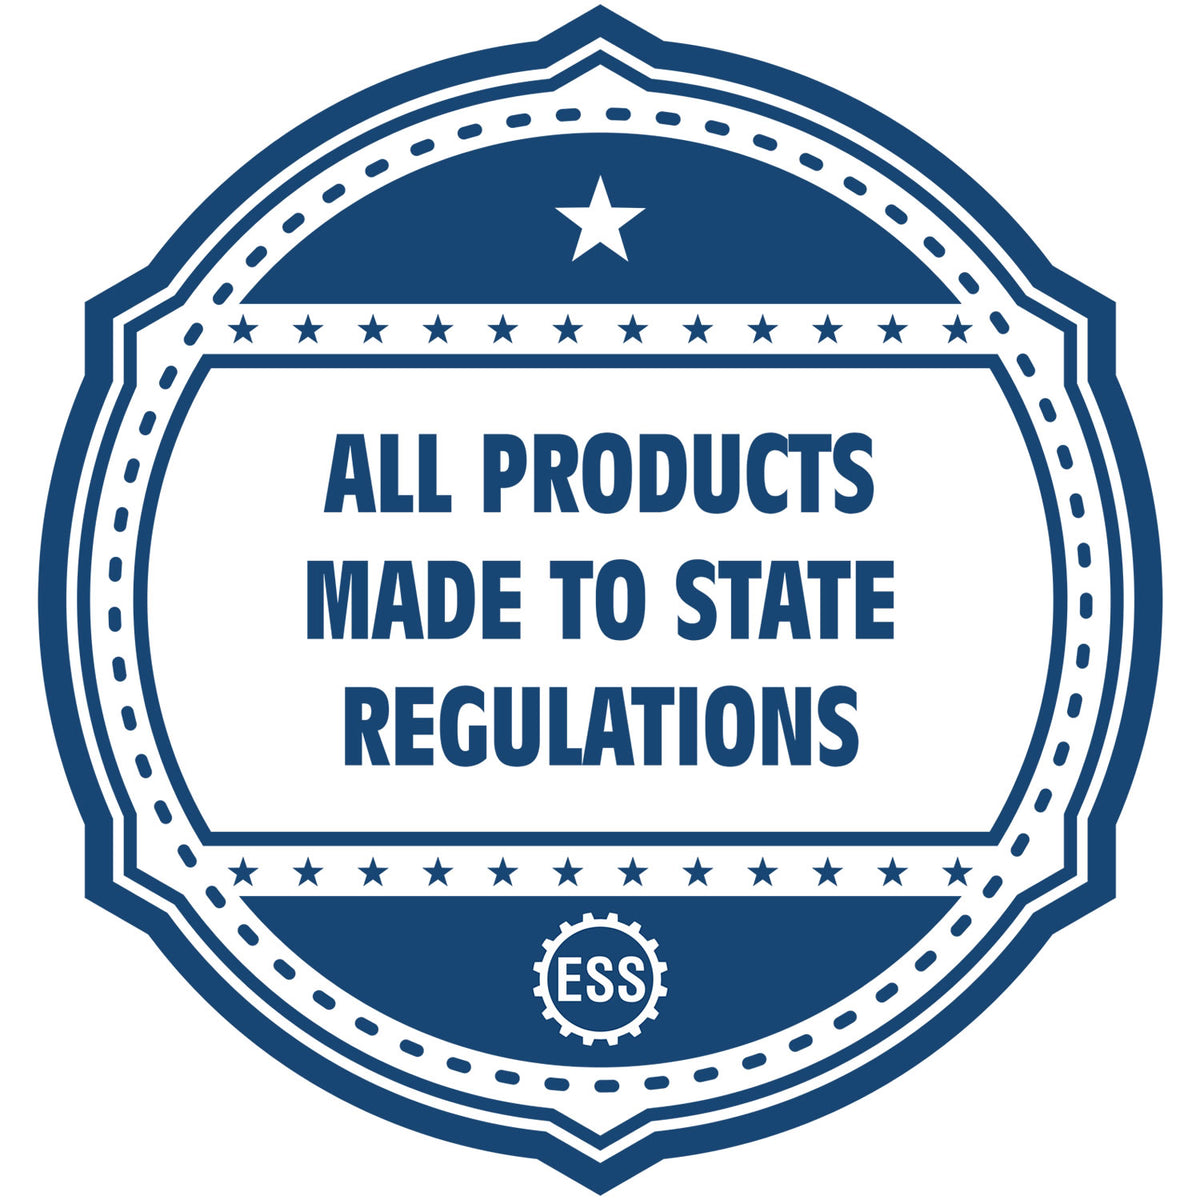 An icon or badge element for the Long Reach North Dakota PE Seal showing that this product is made in compliance with state regulations.